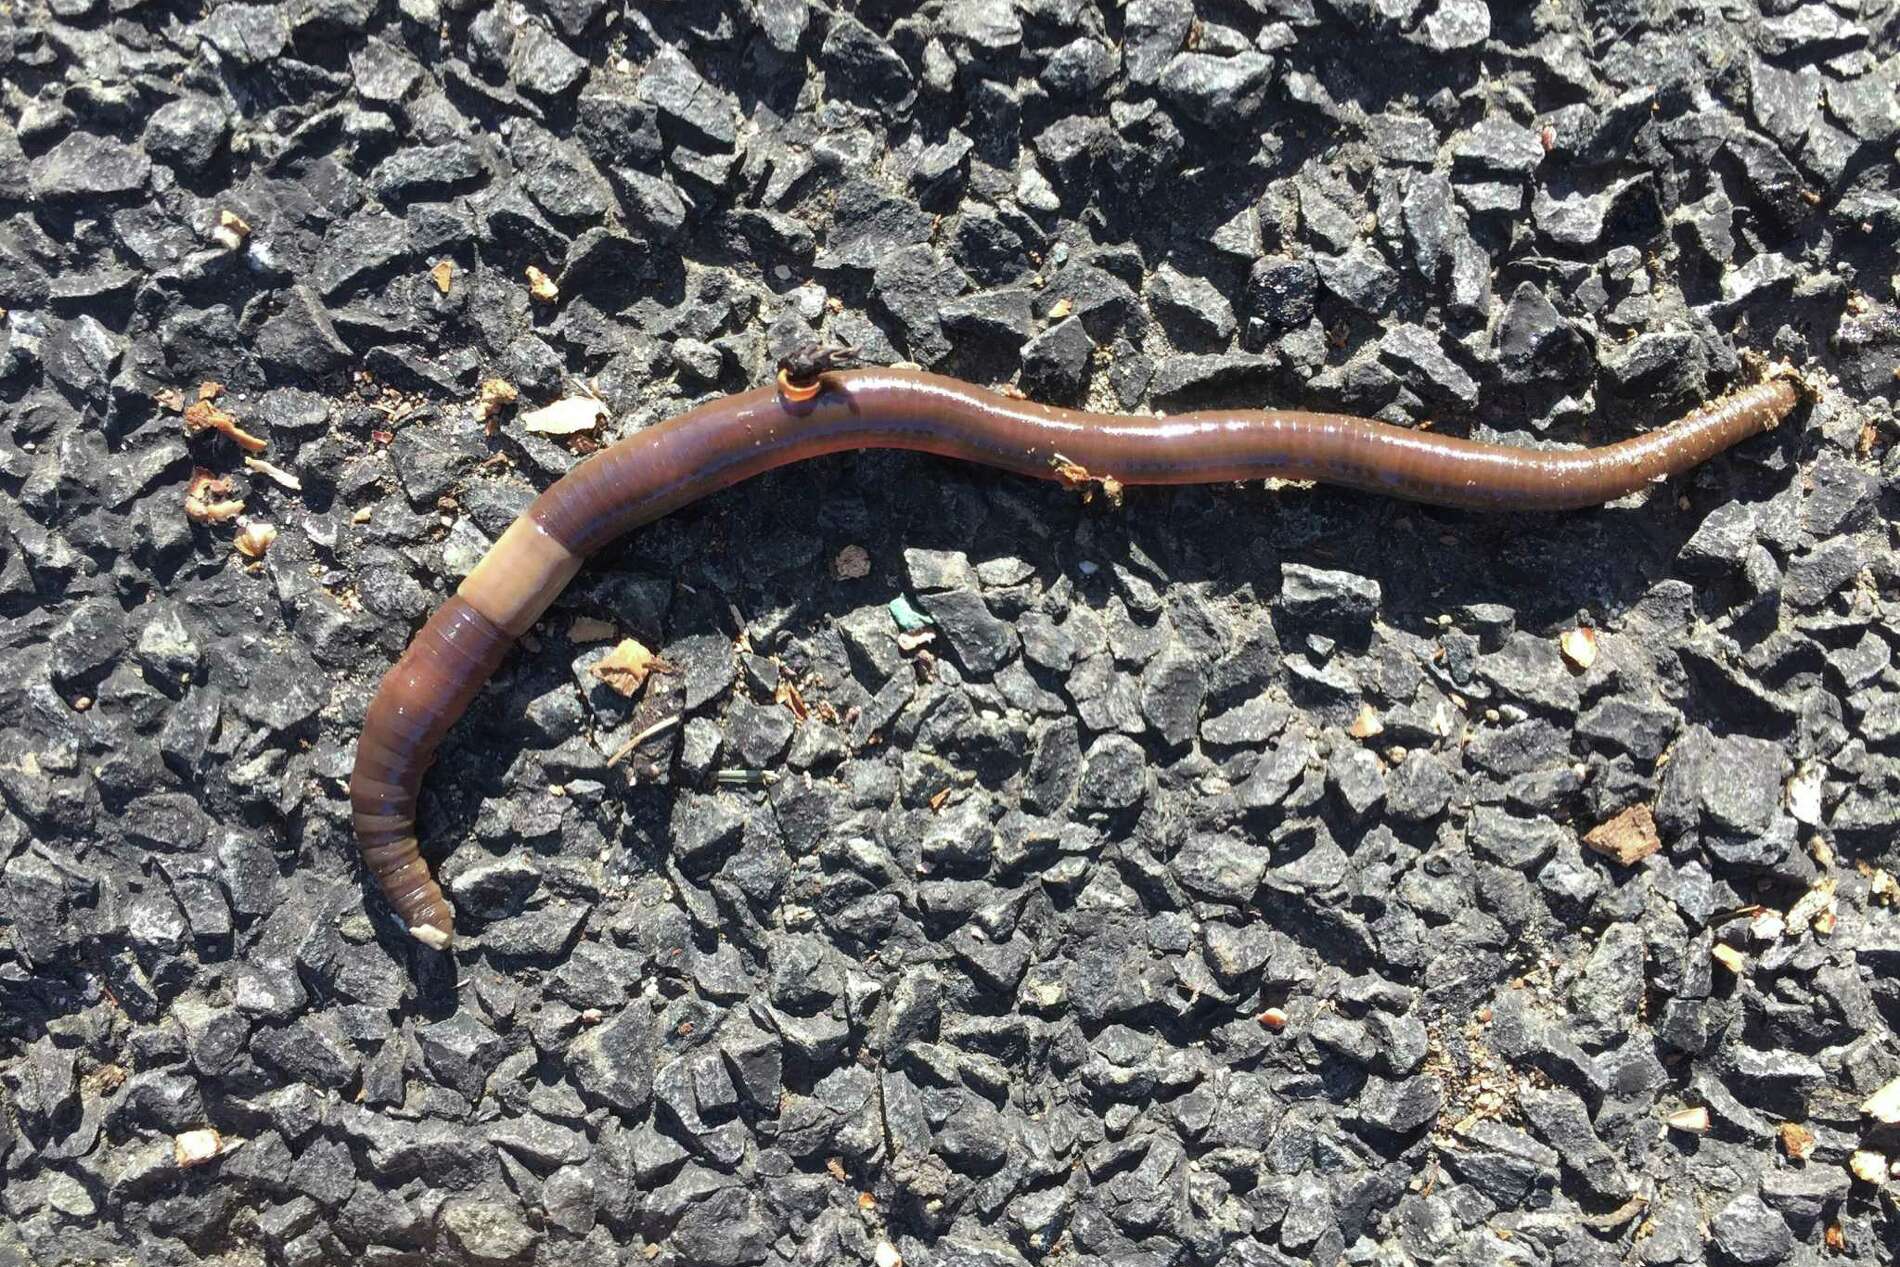 A giant earthworm known as a ‘jumping worm’ is spreading in Connecticut